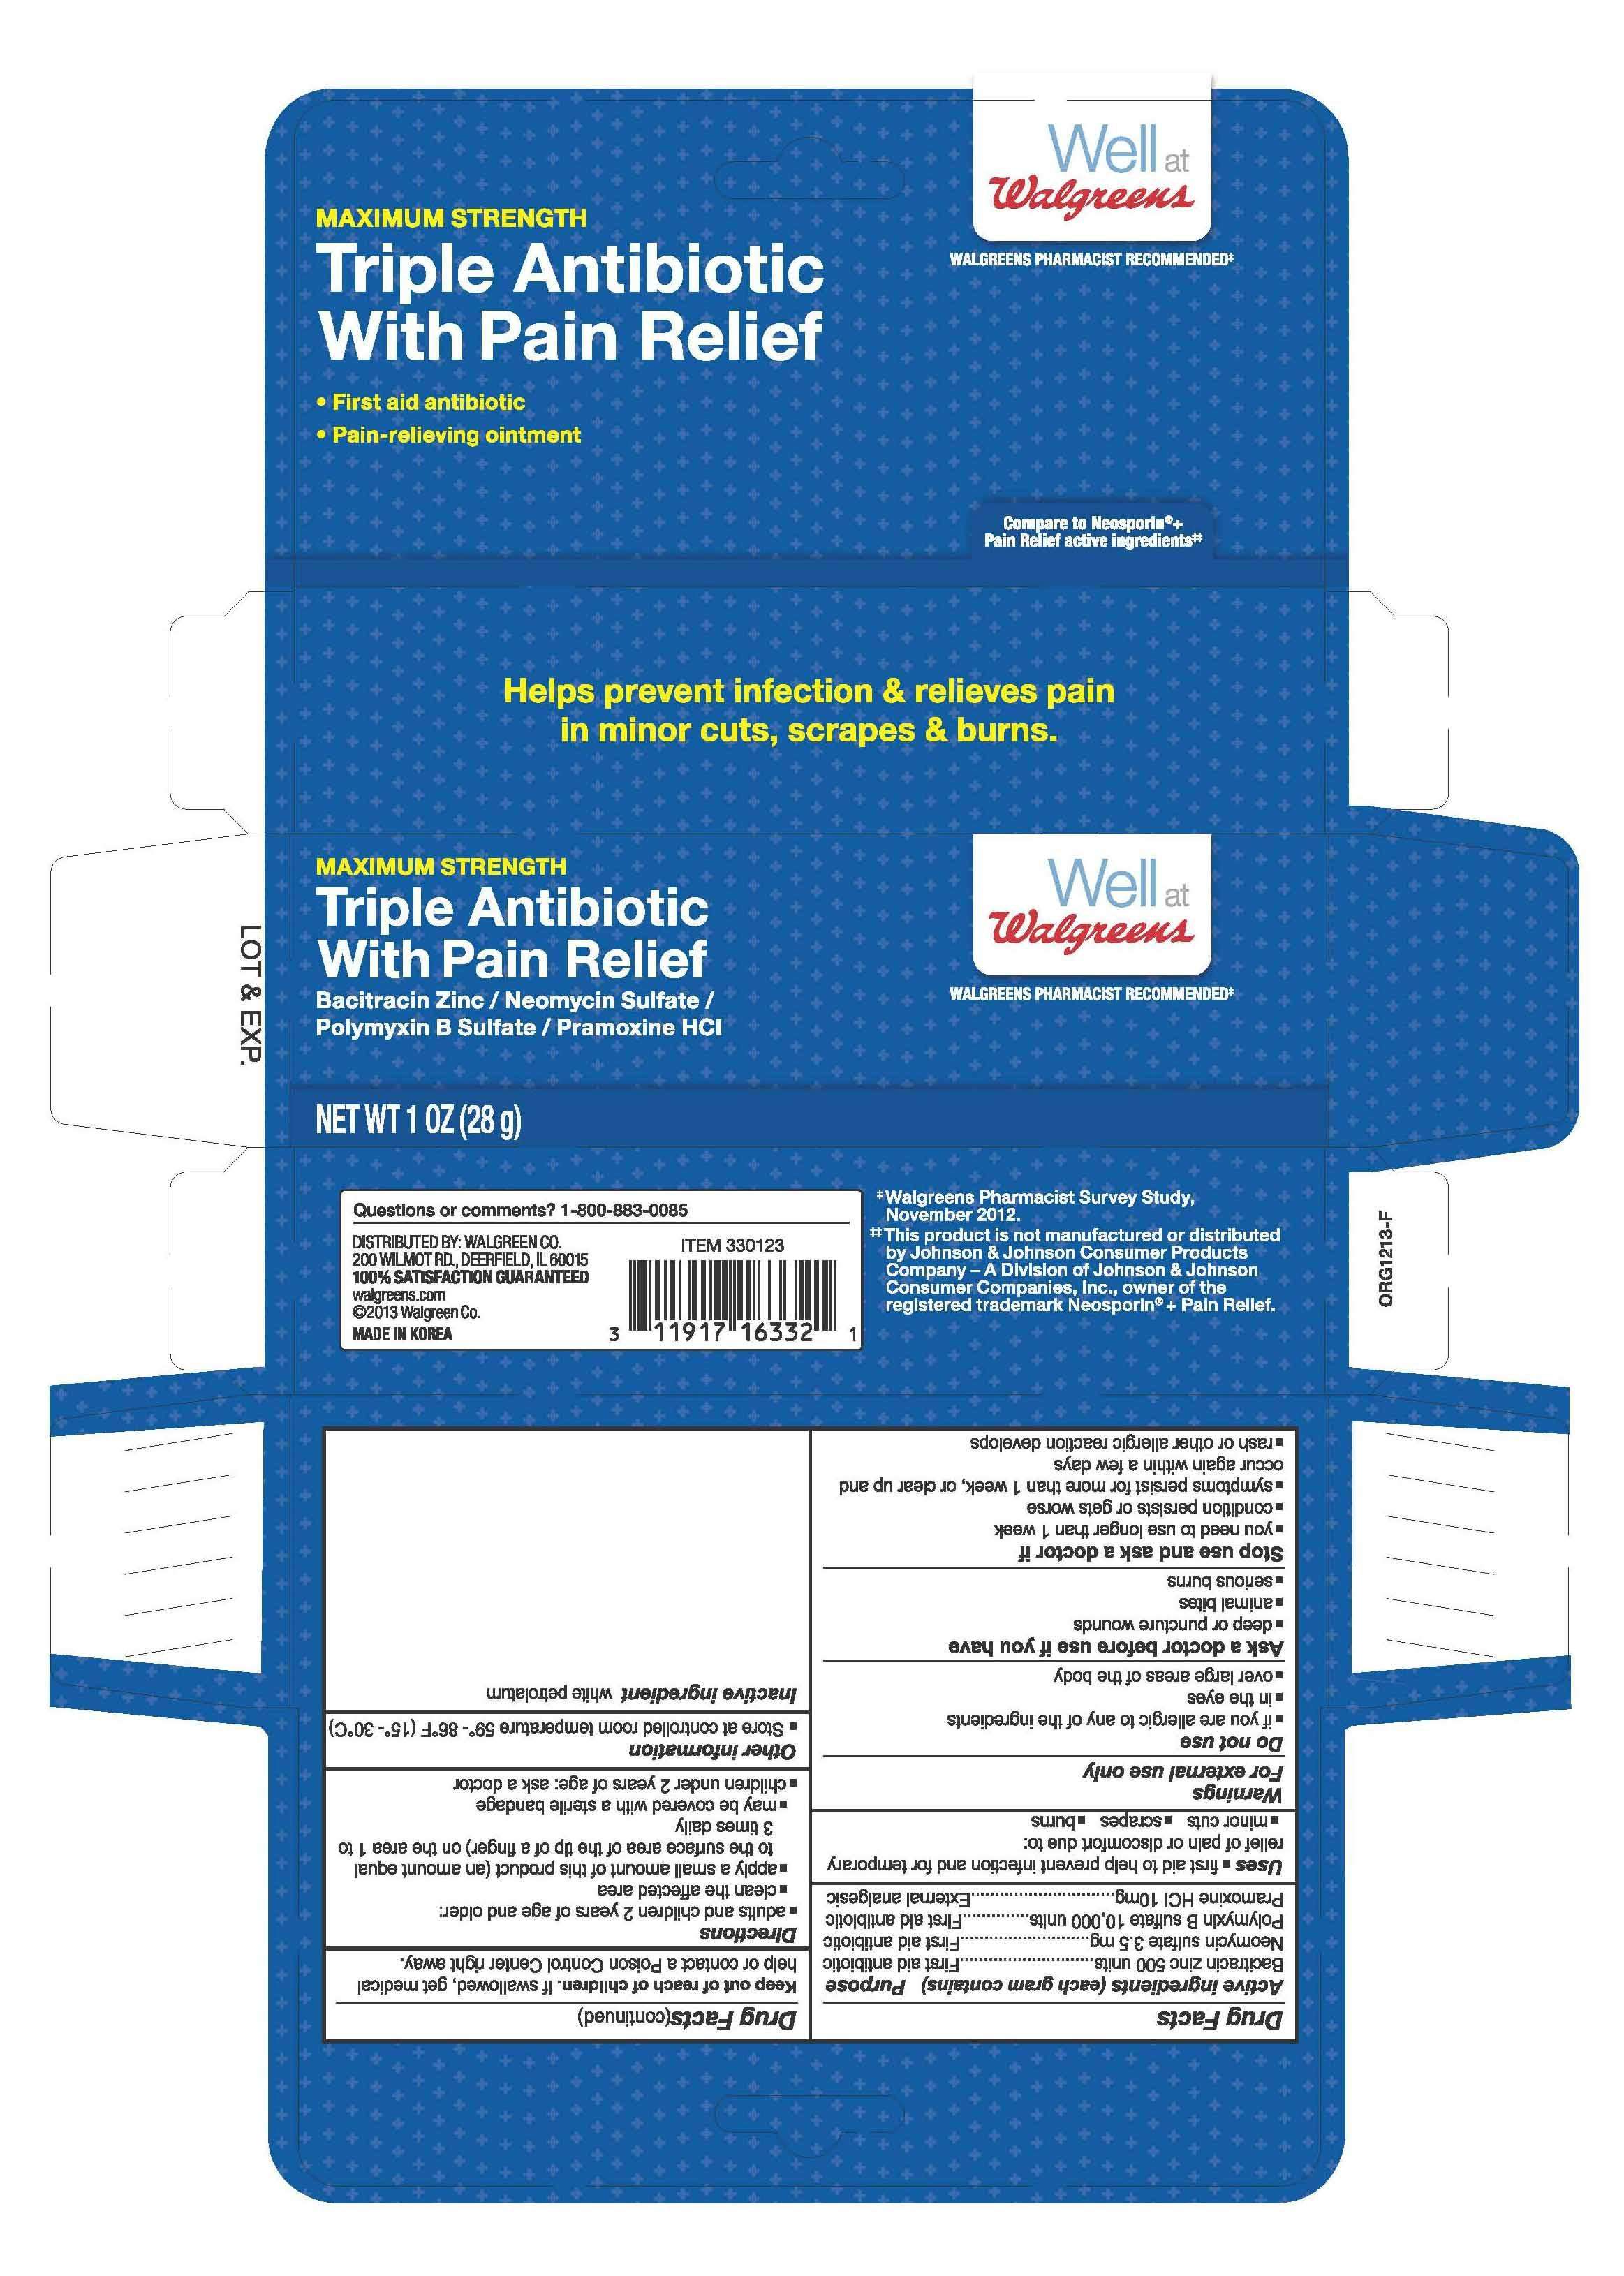 Triple Antibiotic with Pain Relief